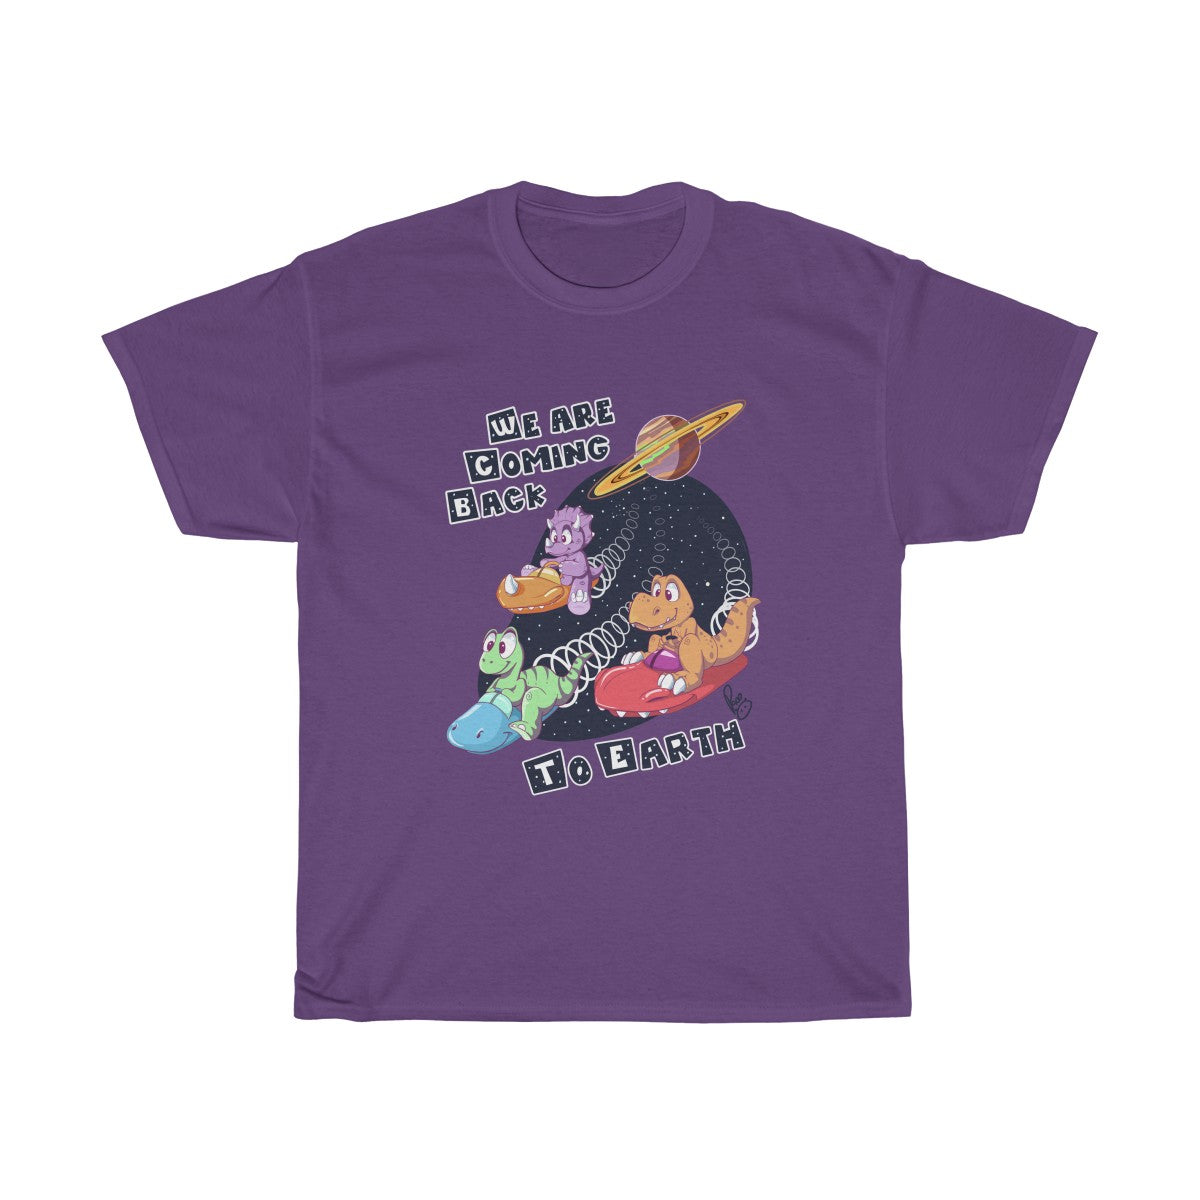 We are coming back to Earth - T-Shirt T-Shirt Paco Panda Purple S 